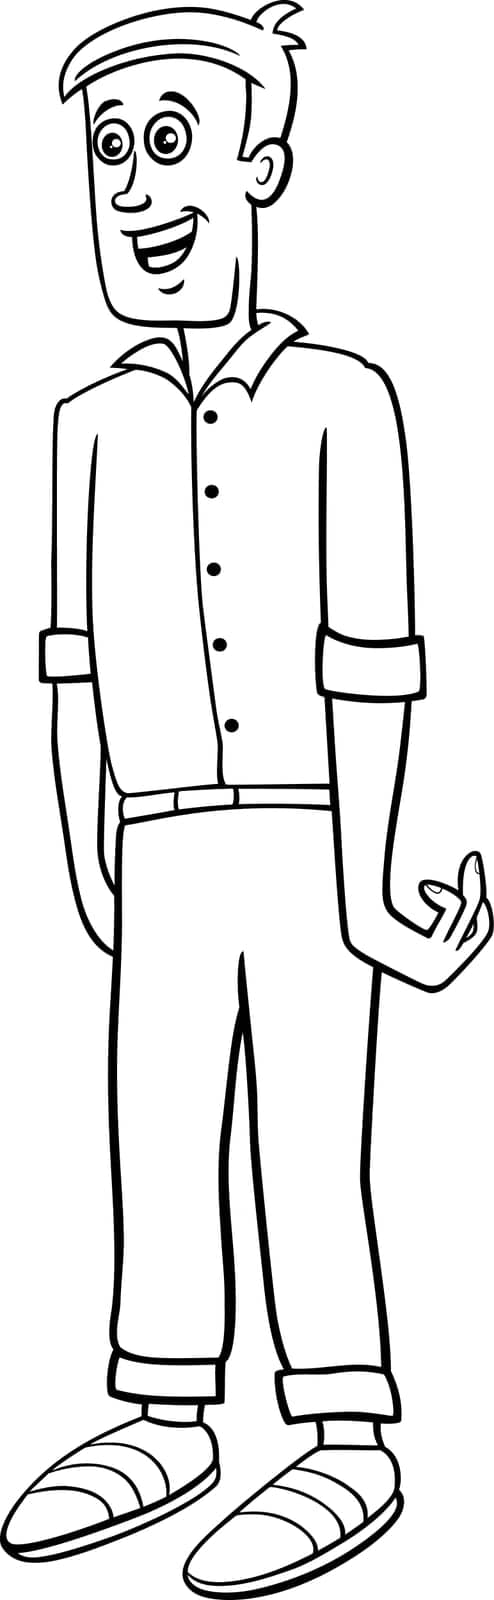 Cartoon illustration of funny young man or guy comic character coloring page